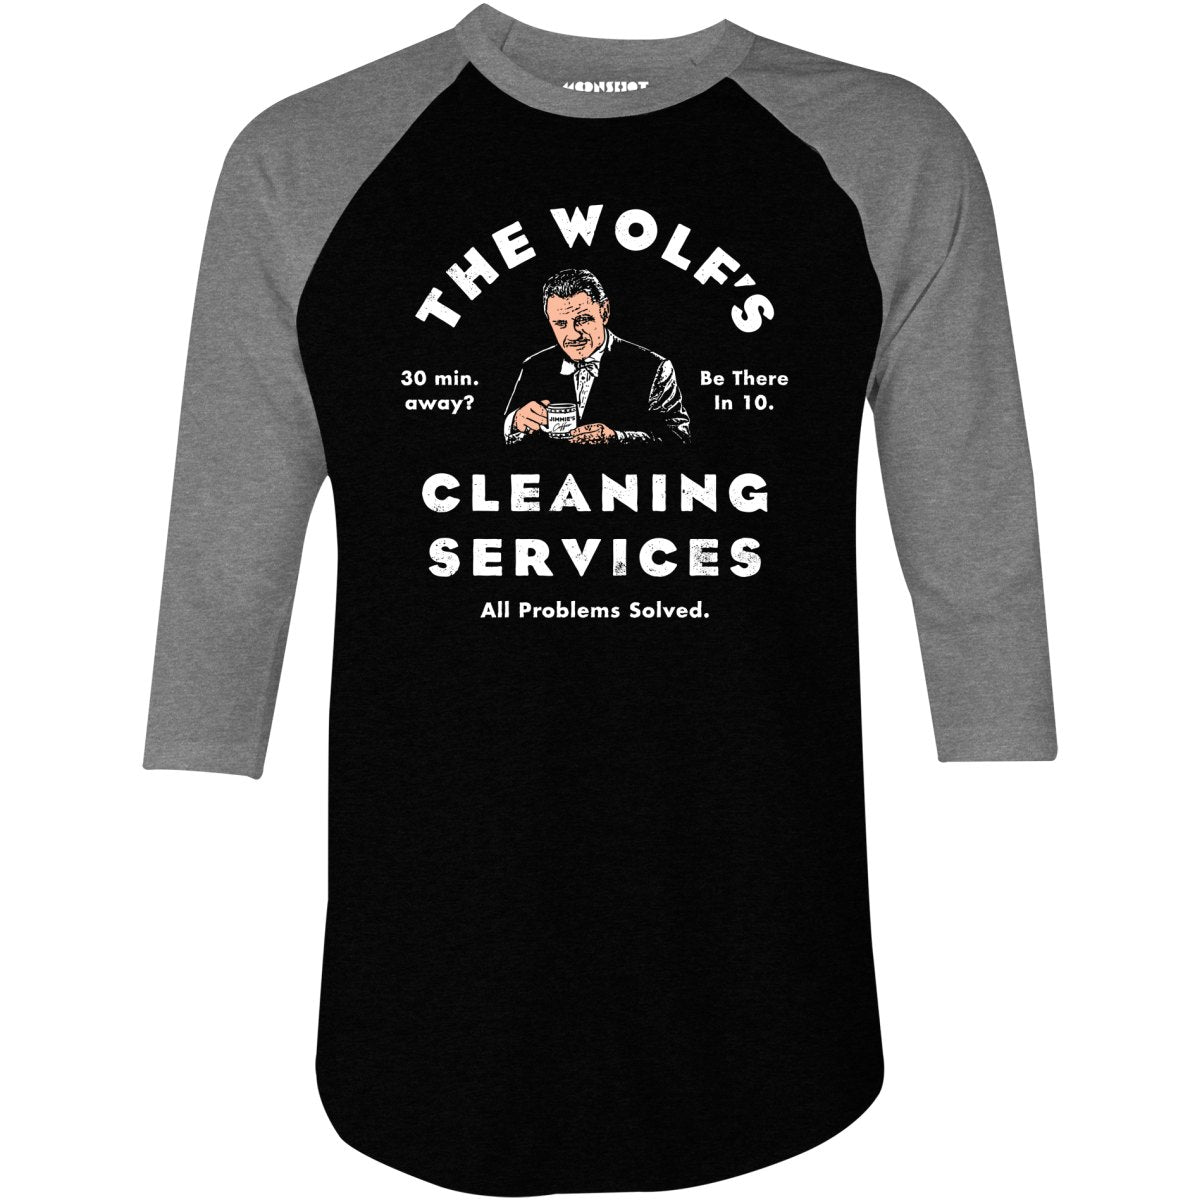 The Wolf's Cleaning Services - 3/4 Sleeve Raglan T-Shirt